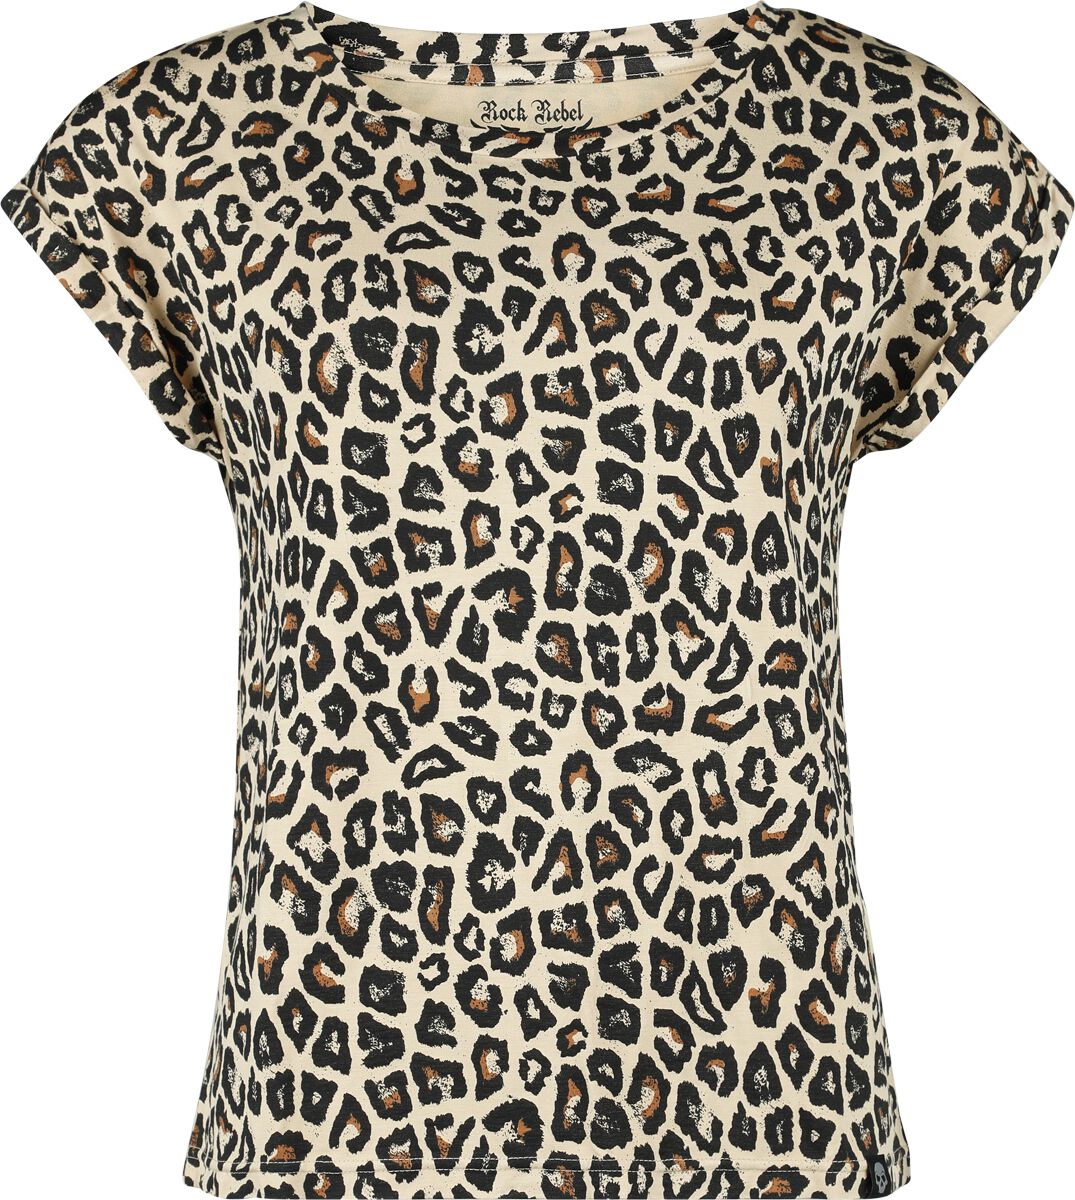 Image of T-Shirt di Rock Rebel by EMP - Leo Shirt - S a XXL - Donna - leopardato